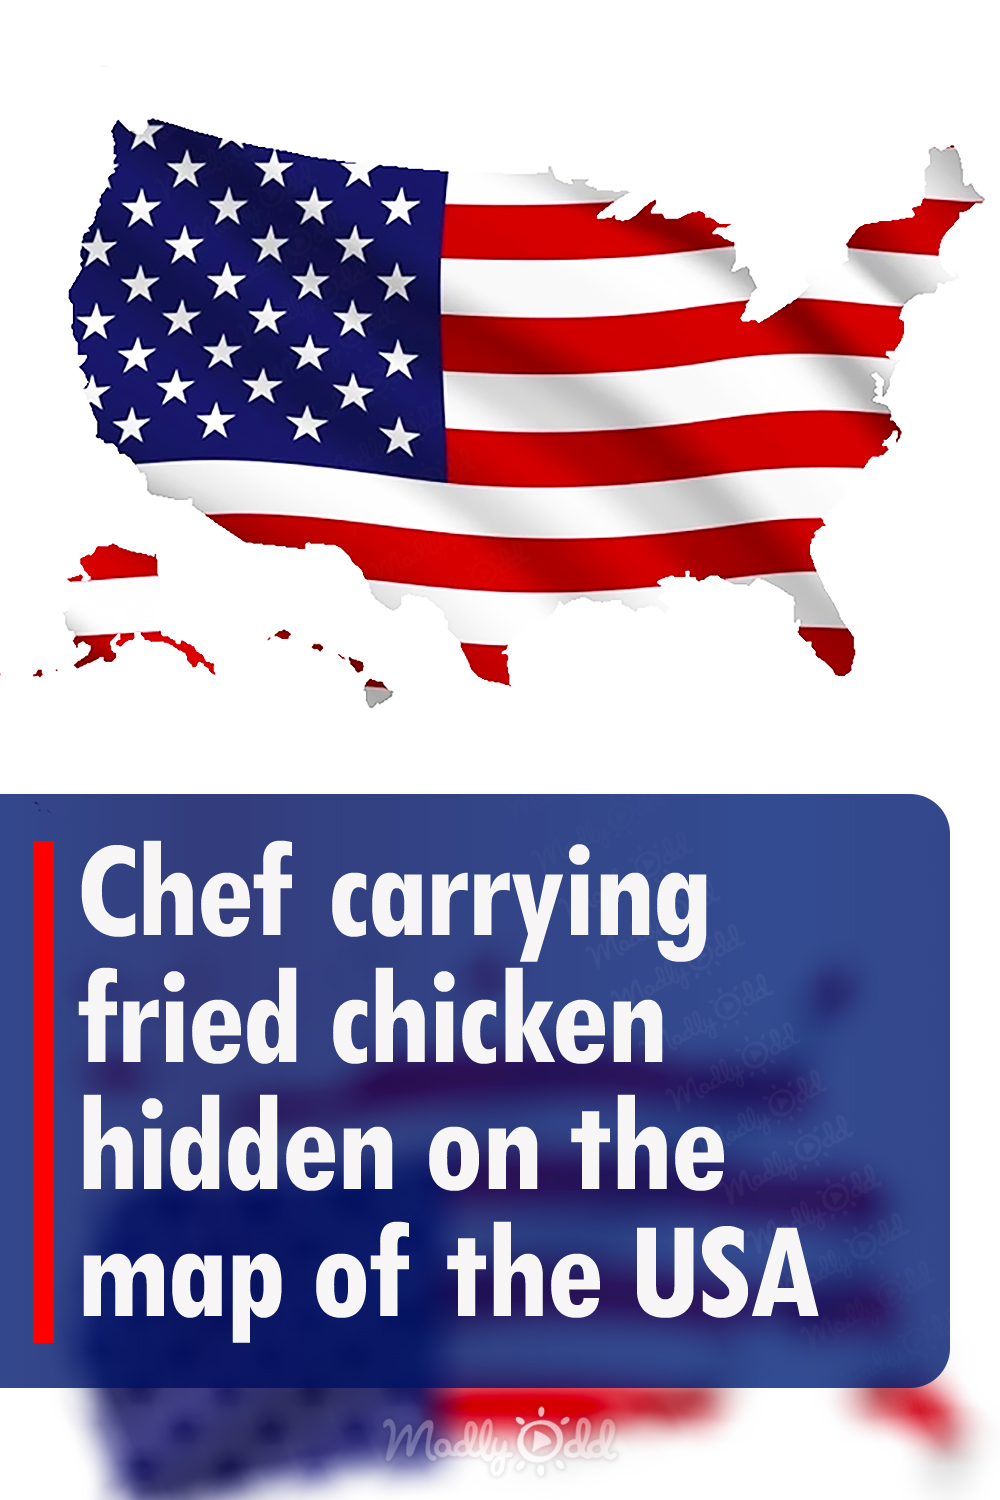 Chef carrying fried chicken hidden on the map of the USA